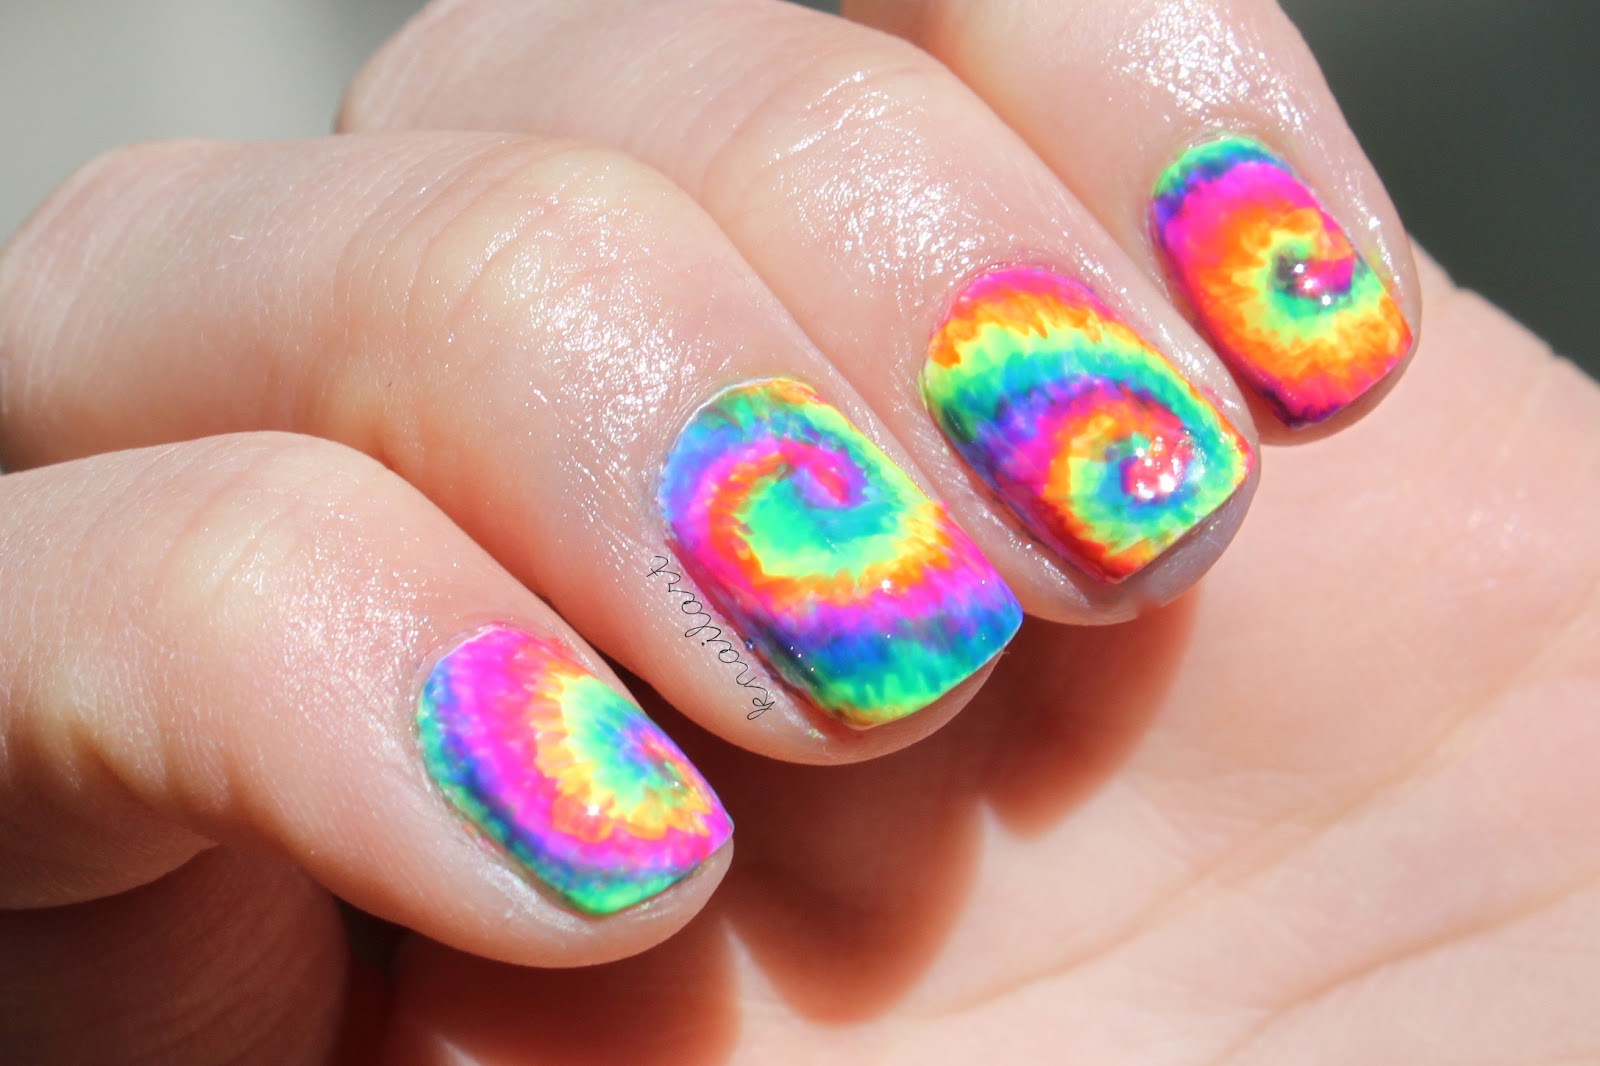 5. Fun and Creative Nail Art Designs to Try at Home - wide 8